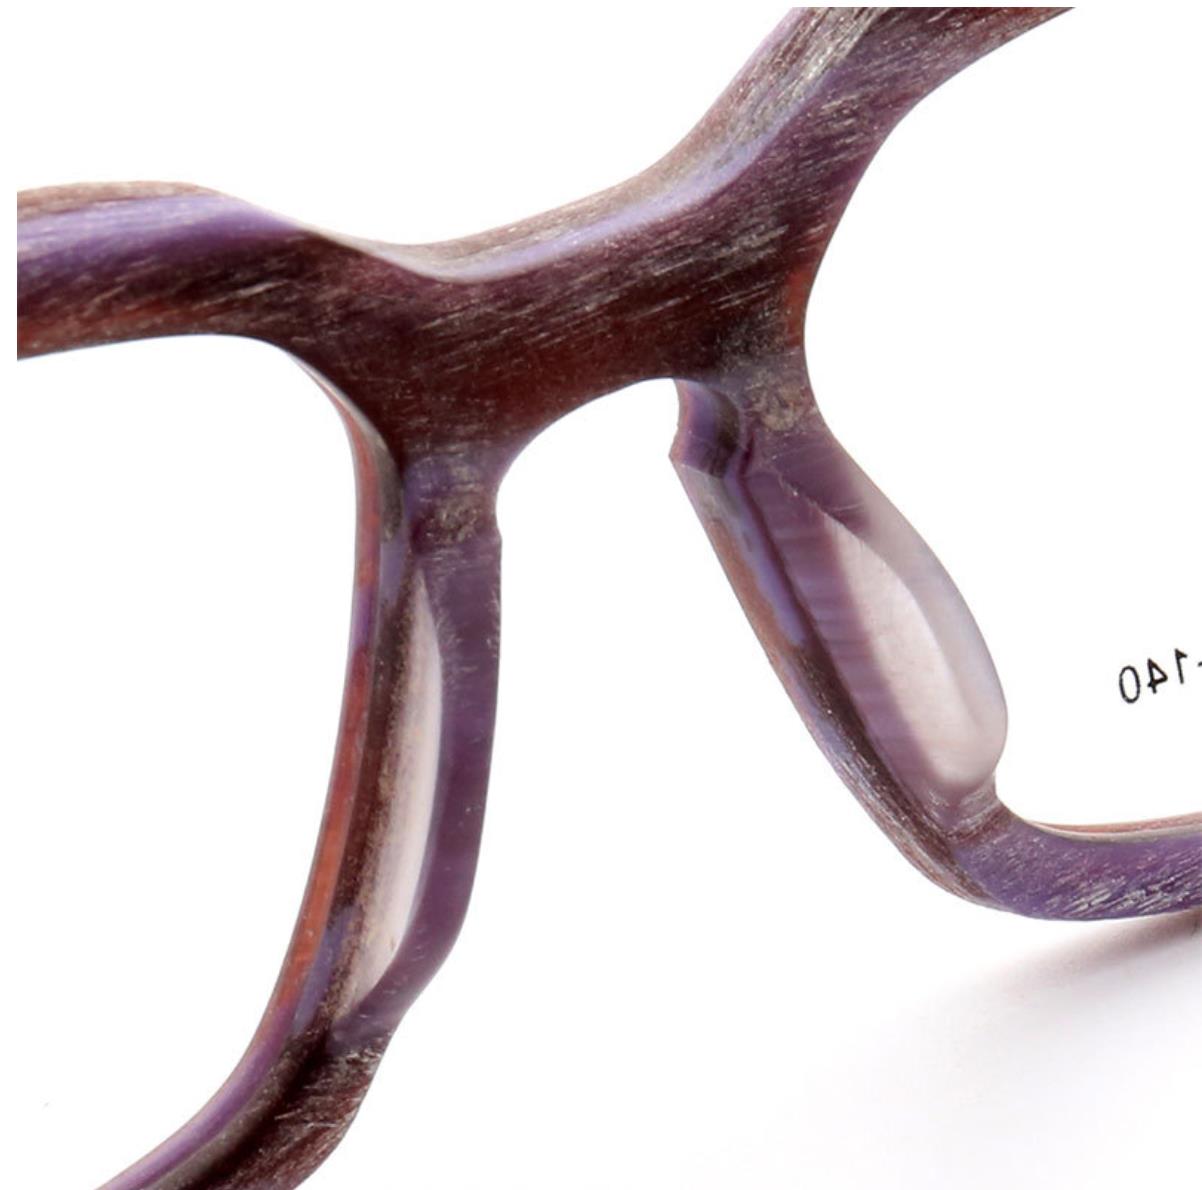 Nose pads of two toned wooden eyeglass frames